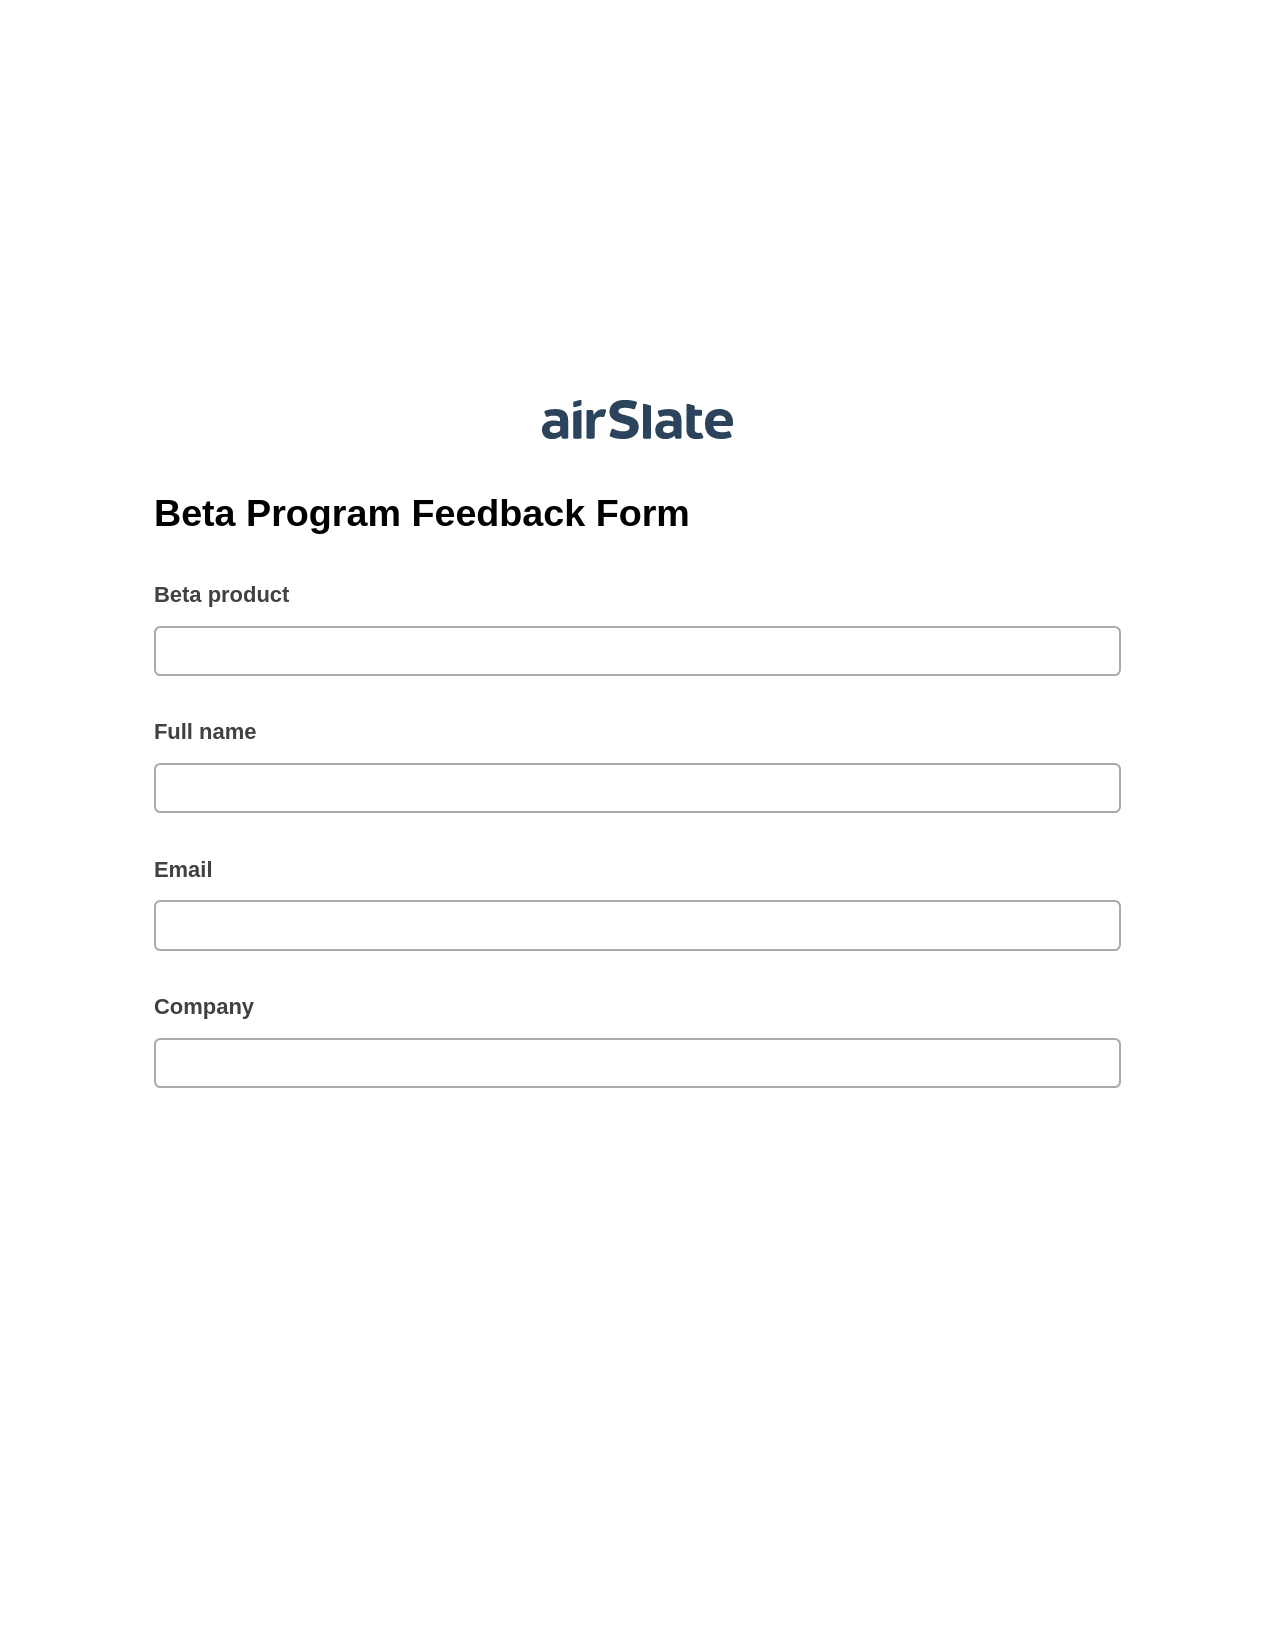 Beta Program Feedback Form Pre-fill from another Slate Bot, Update Salesforce Record Bot, Post-finish Document Bot